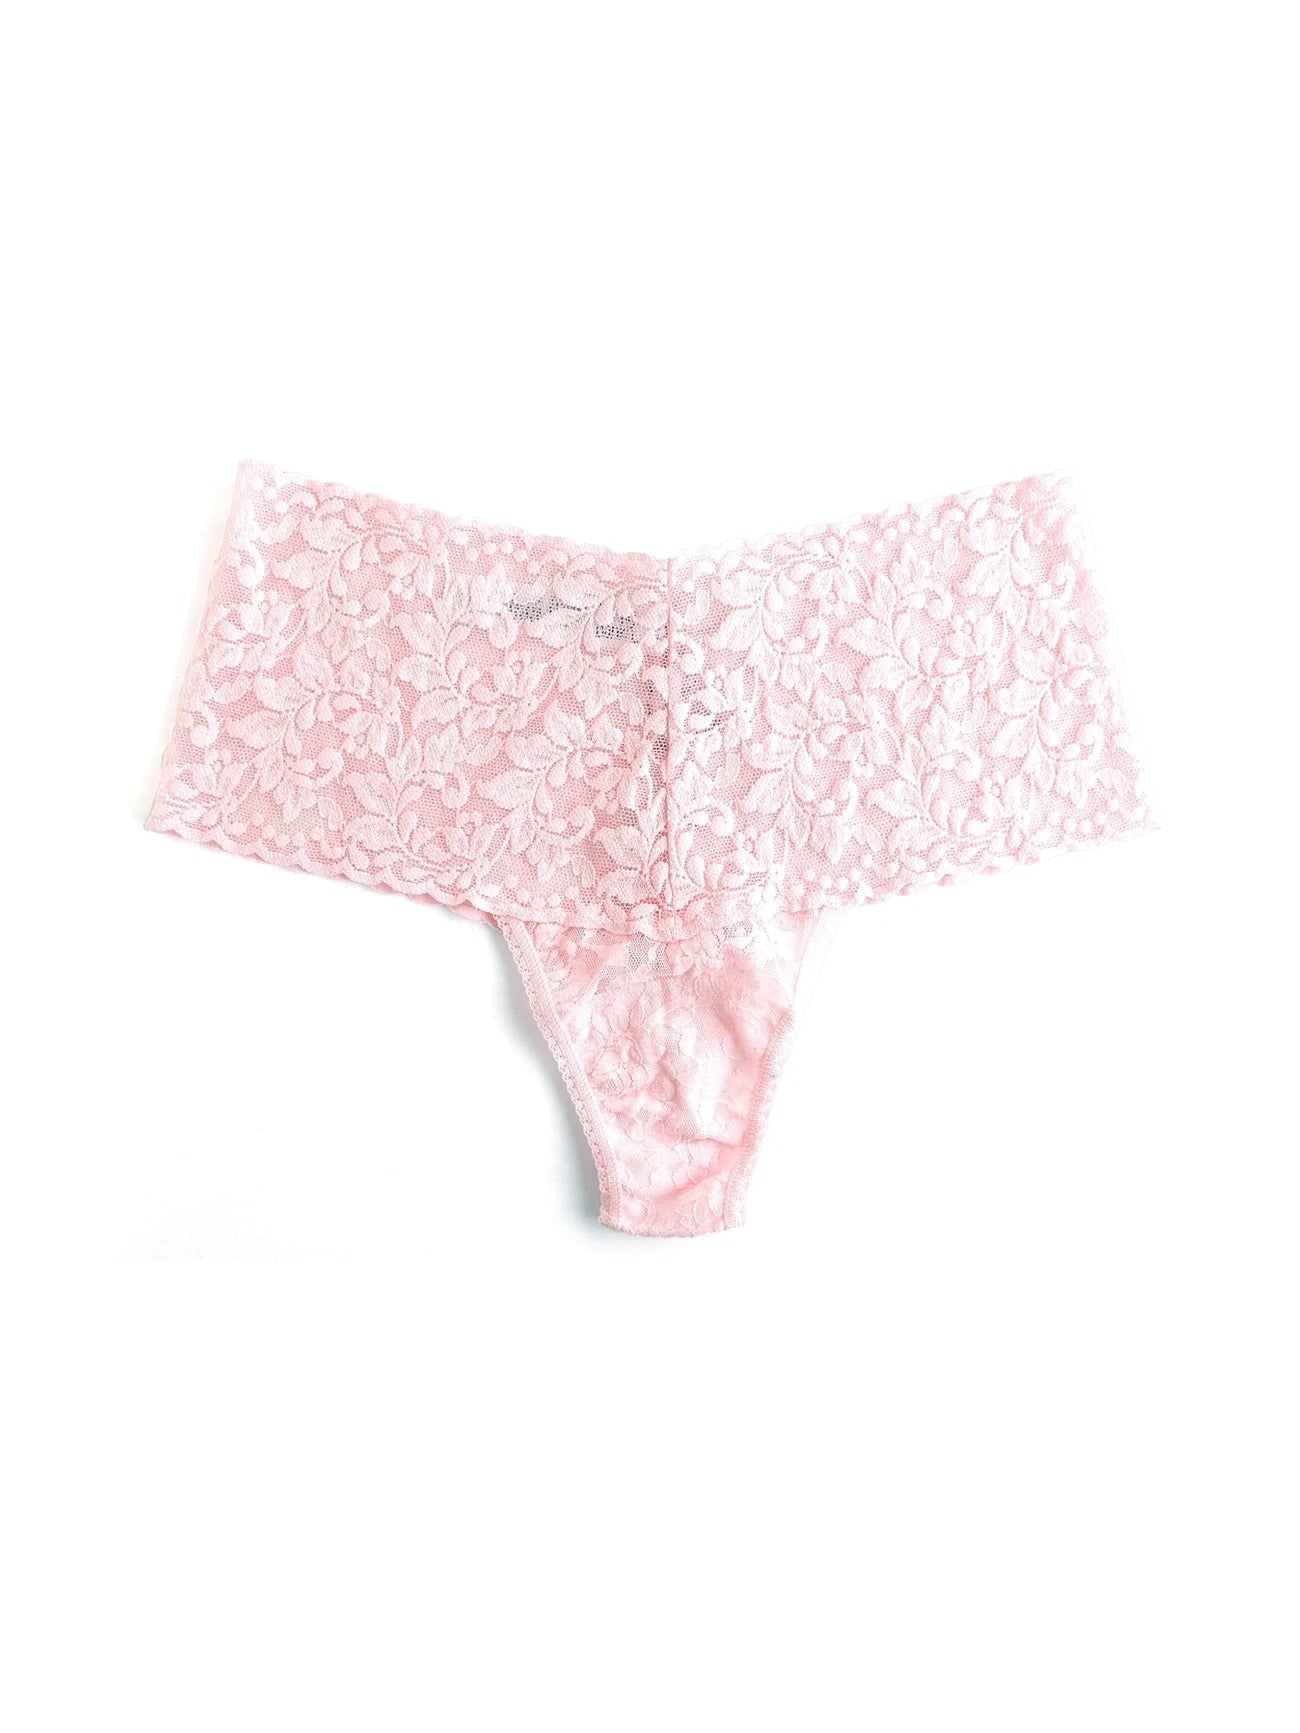 Retro Lace Thong Packaged Bliss Pink